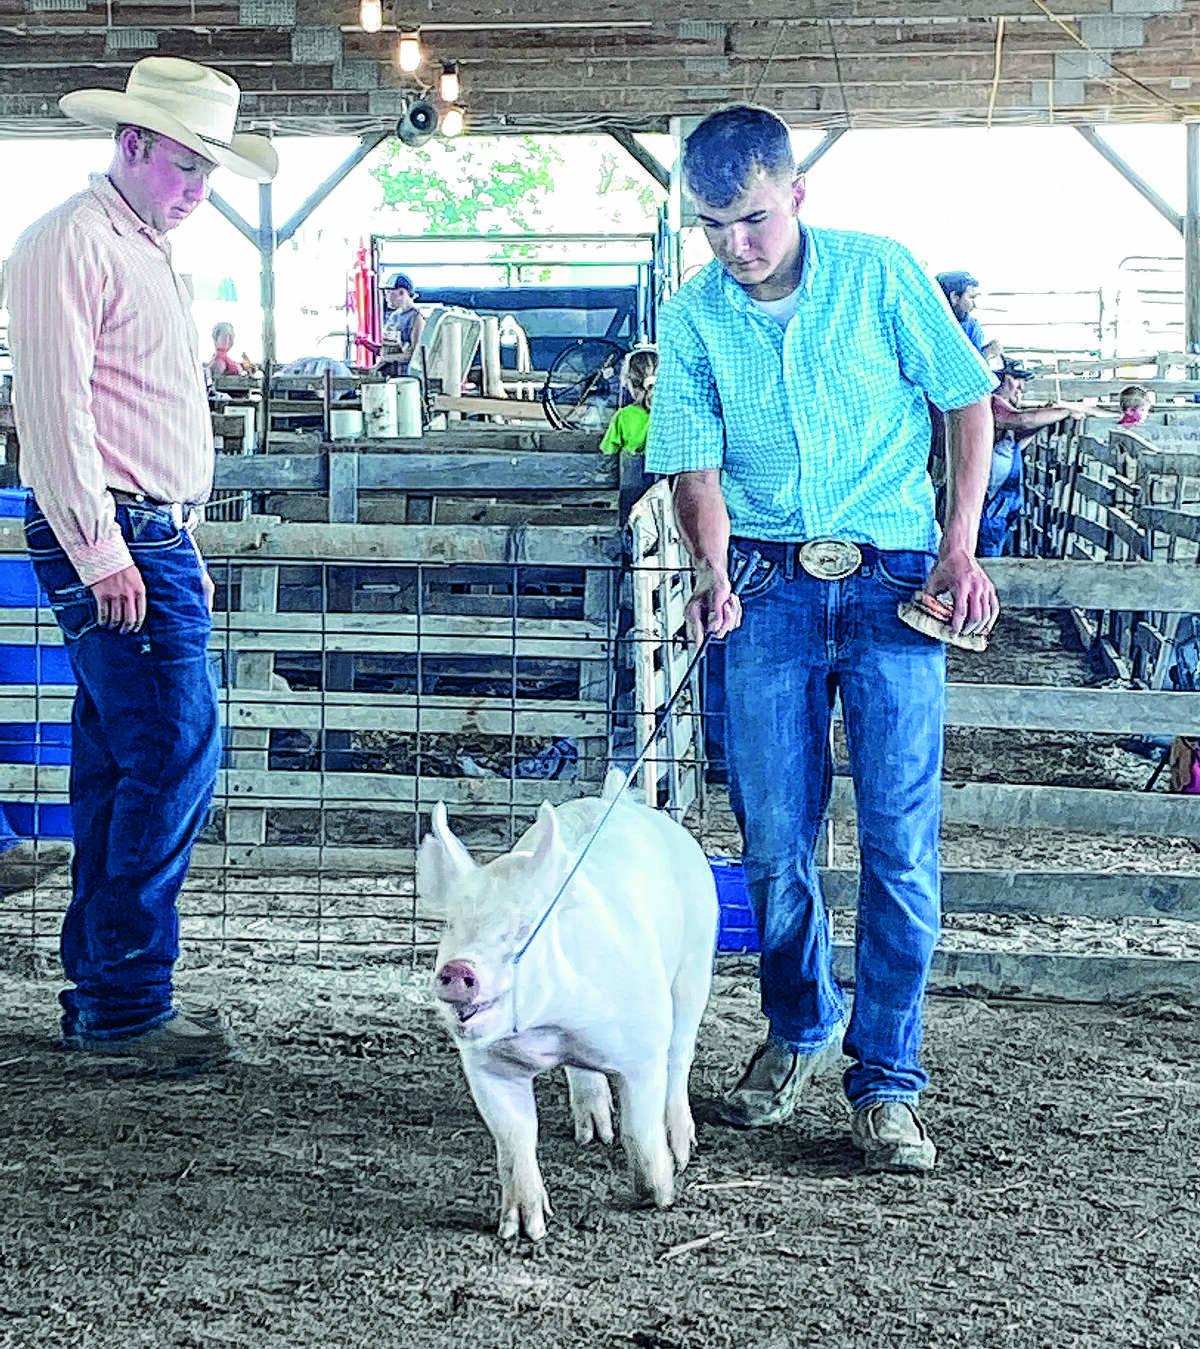 Two members of the Bluffs FFA chapter attended the Section 13 VoAg Fair earlier this year. Colton Coats and Zack Evans traveled to Carrollton to show at the Greene County Fairgrounds. Evans, who keeps his supervised agricultural experience focused on swine production, showed his pigs. He won grand champion with his January gilt.